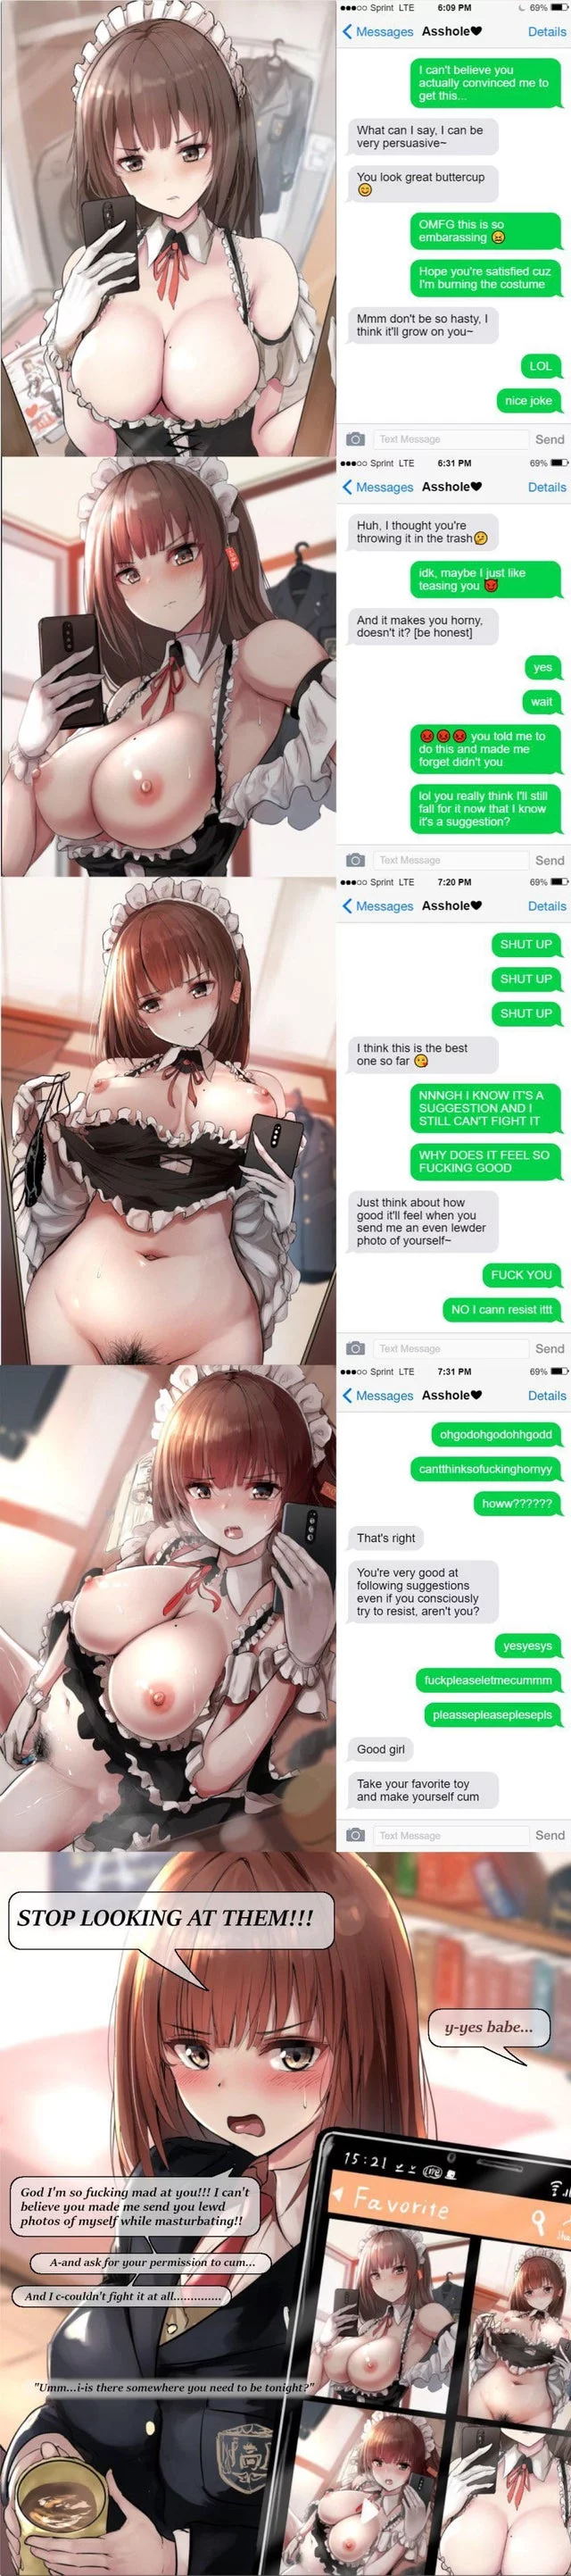 She loves her new uniform! [Maid outfit] [Hypnosis] [Phone chat] [Femsub] [Selfies] [Large breasts]